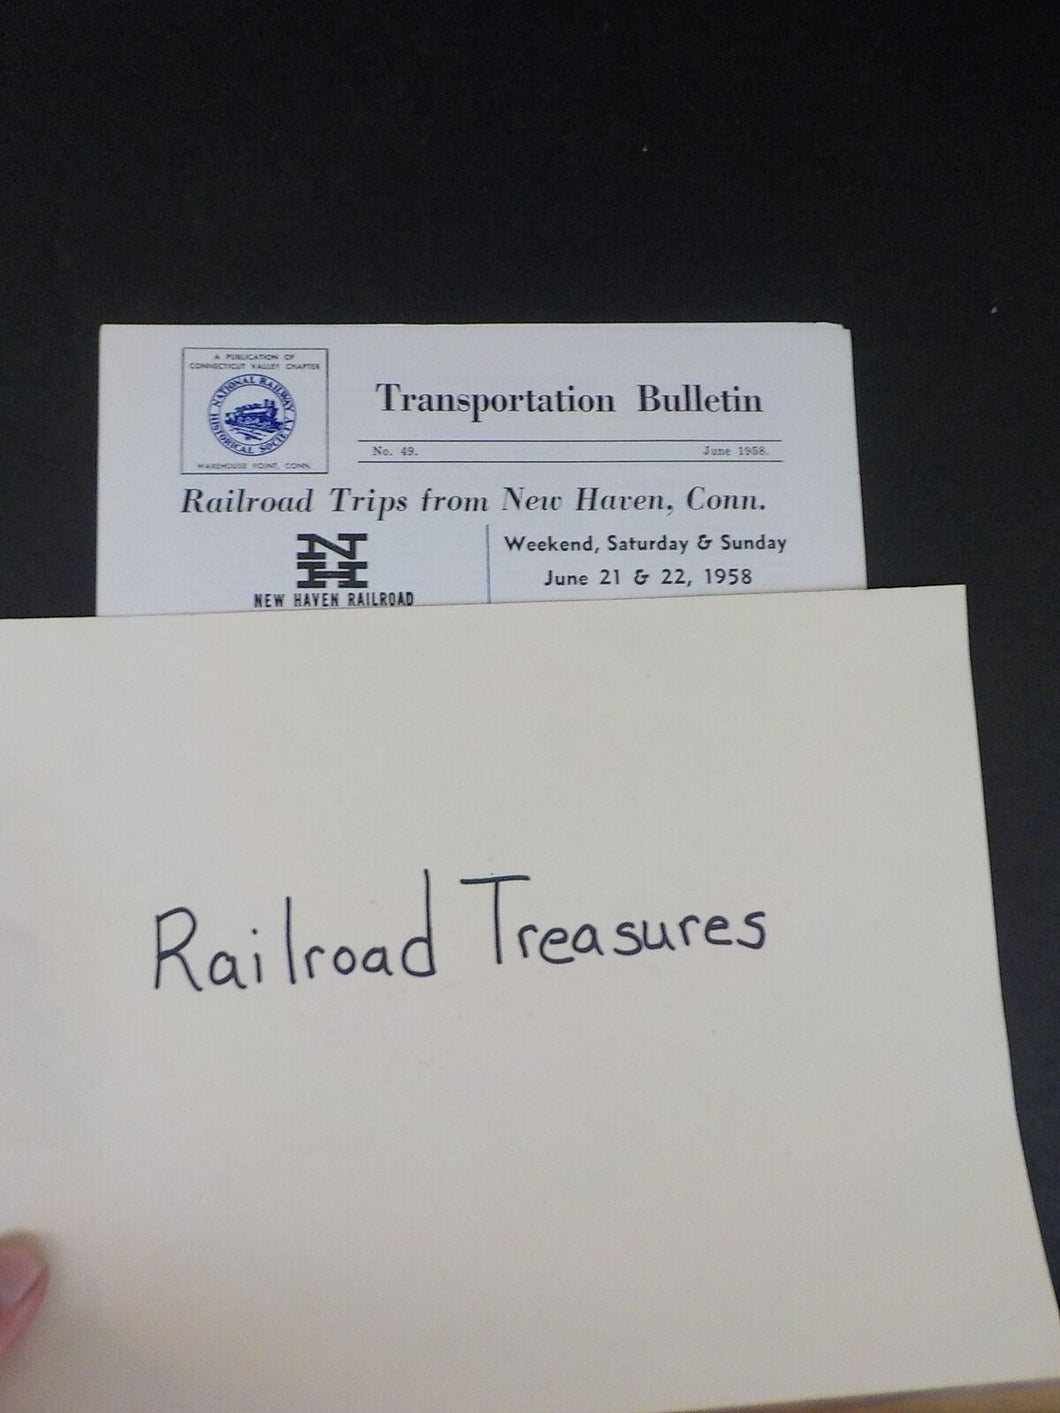 Transportation Bulletin #49 Railroad Trips from New Haven, Conn